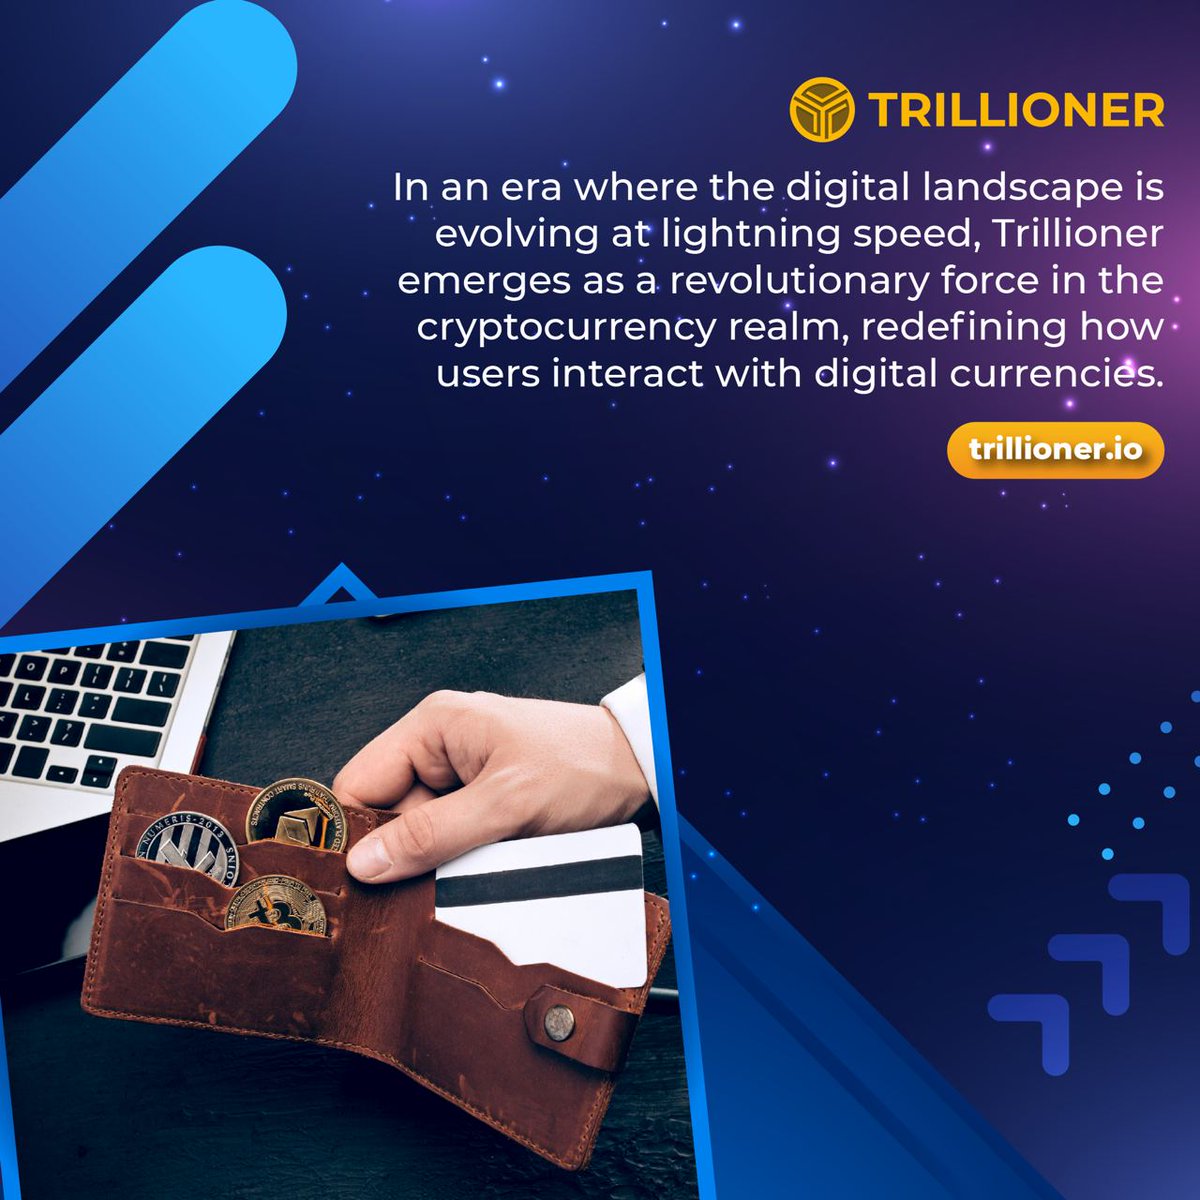 In an era where the digital landscape is evolving at lightning speed, Trillioner emerges as a revolutionary force in the cryptocurrency realm, redefining how users interact with digital currencies.

#TLC #Trillioner #cryptocurrency #cryptonews #cryptotrading #Blockchain